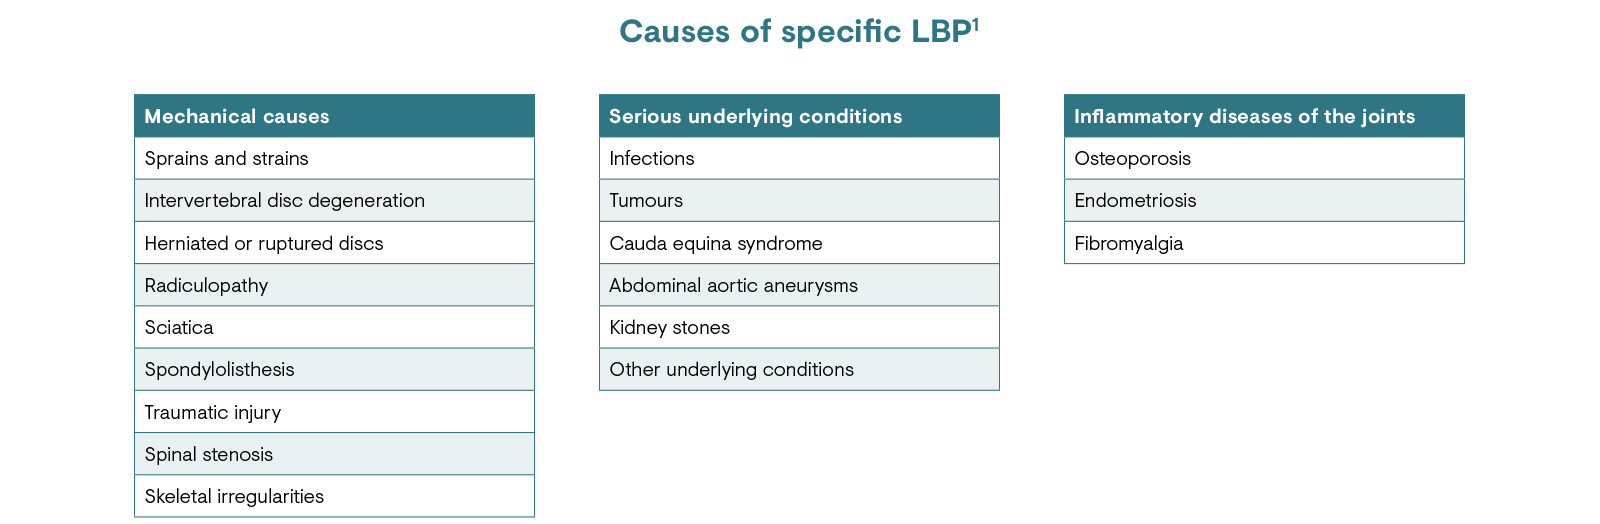 Causes of specific LBP